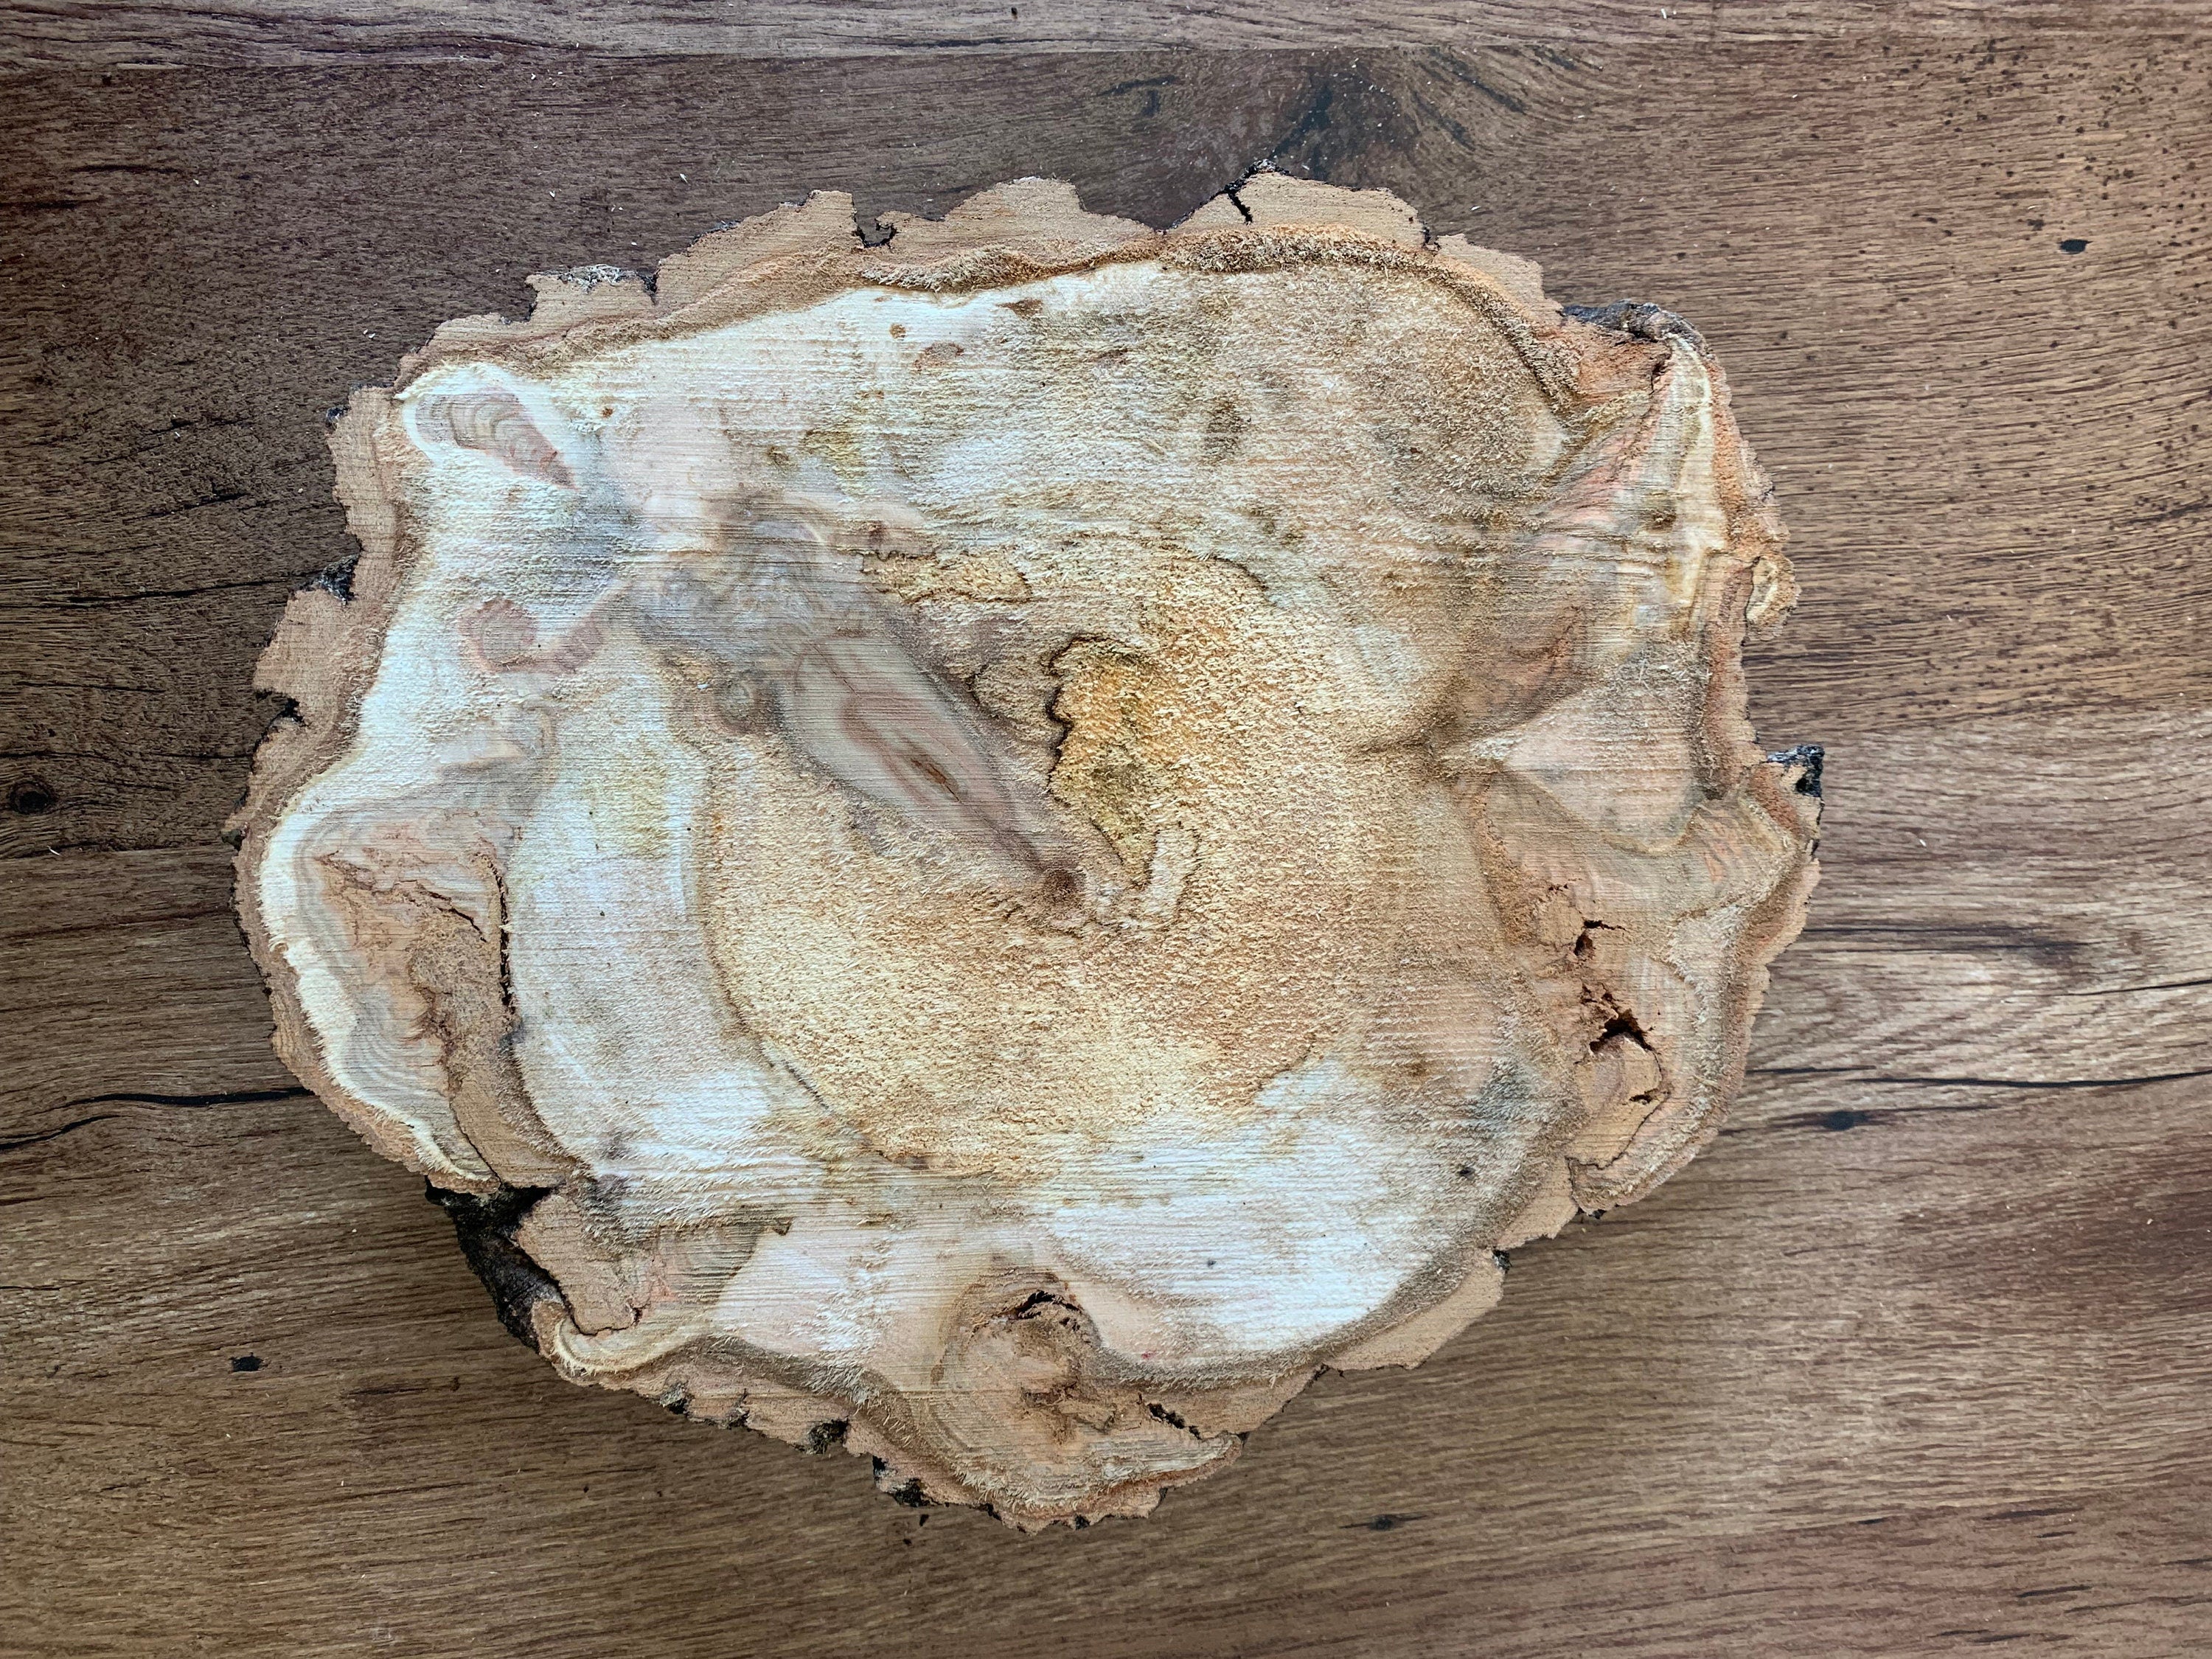 Aspen Burl Slice, Approximately 12 Inches Long by 10 Inches Wide and 2 Inches Thick